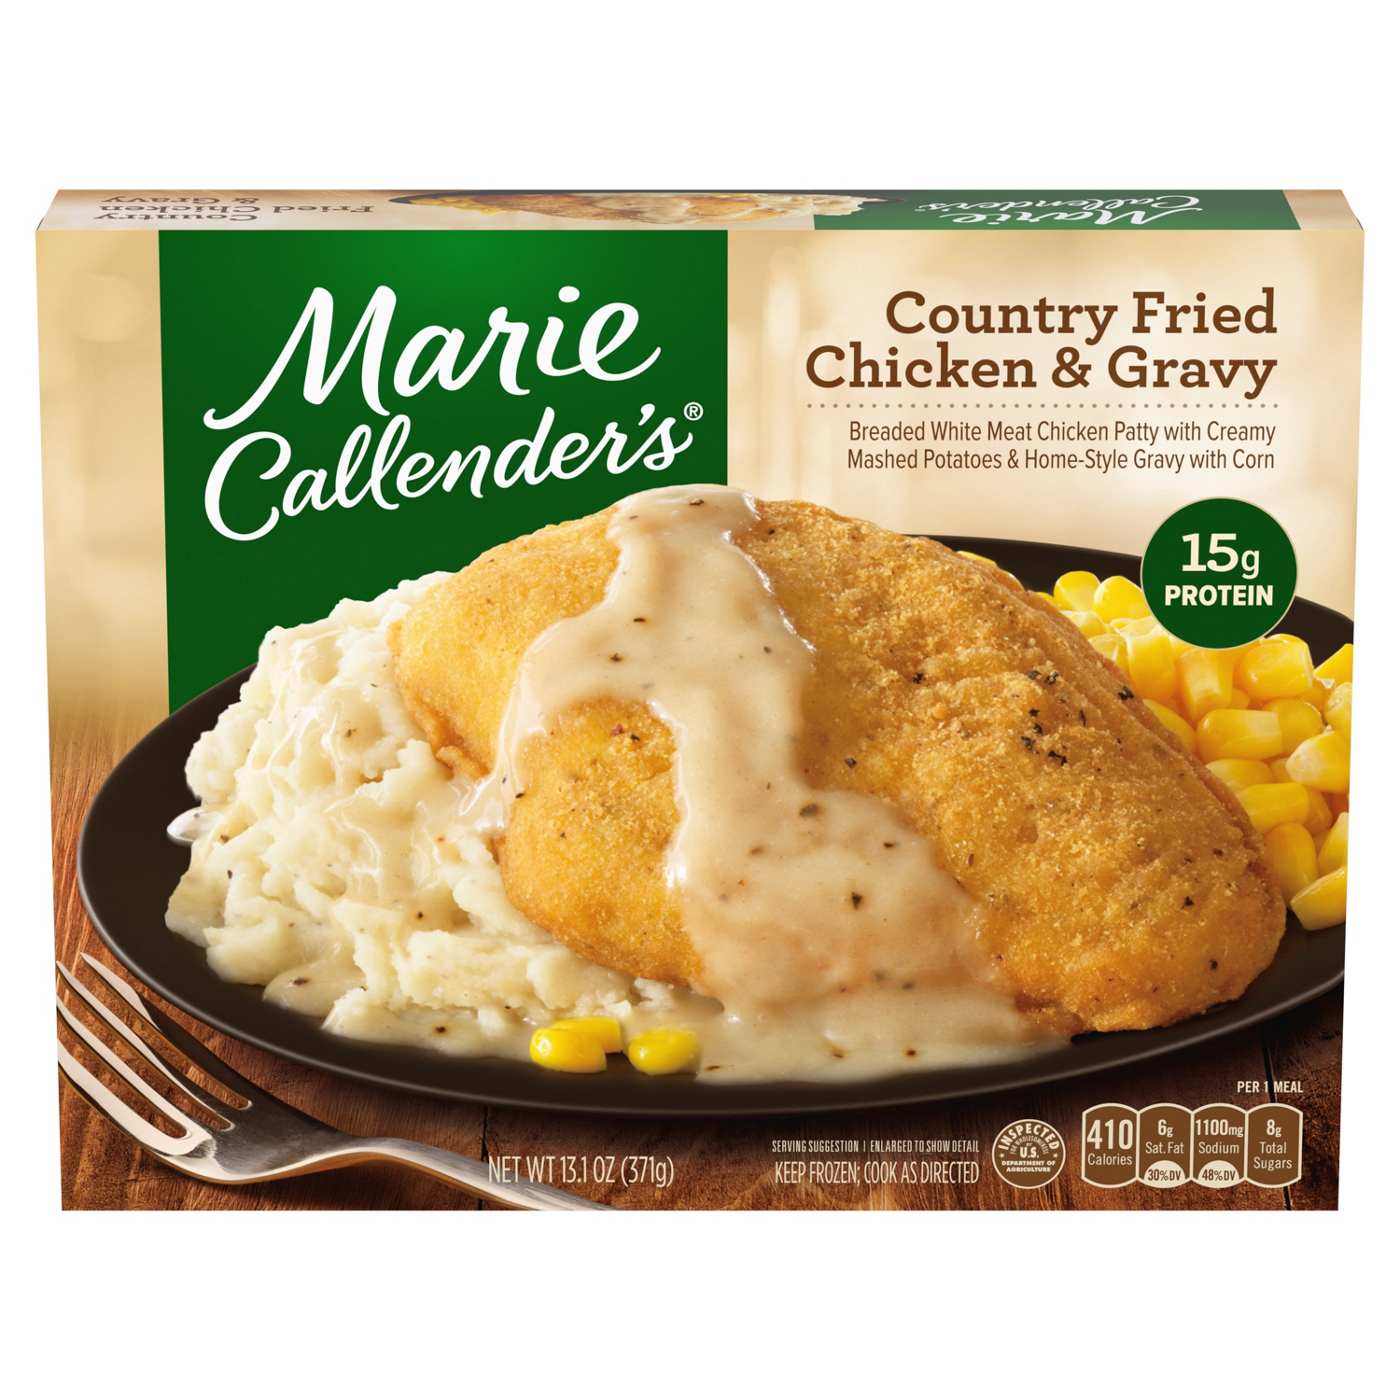 Marie Callender's Country Fried Chicken & Gravy Frozen Meal; image 1 of 4